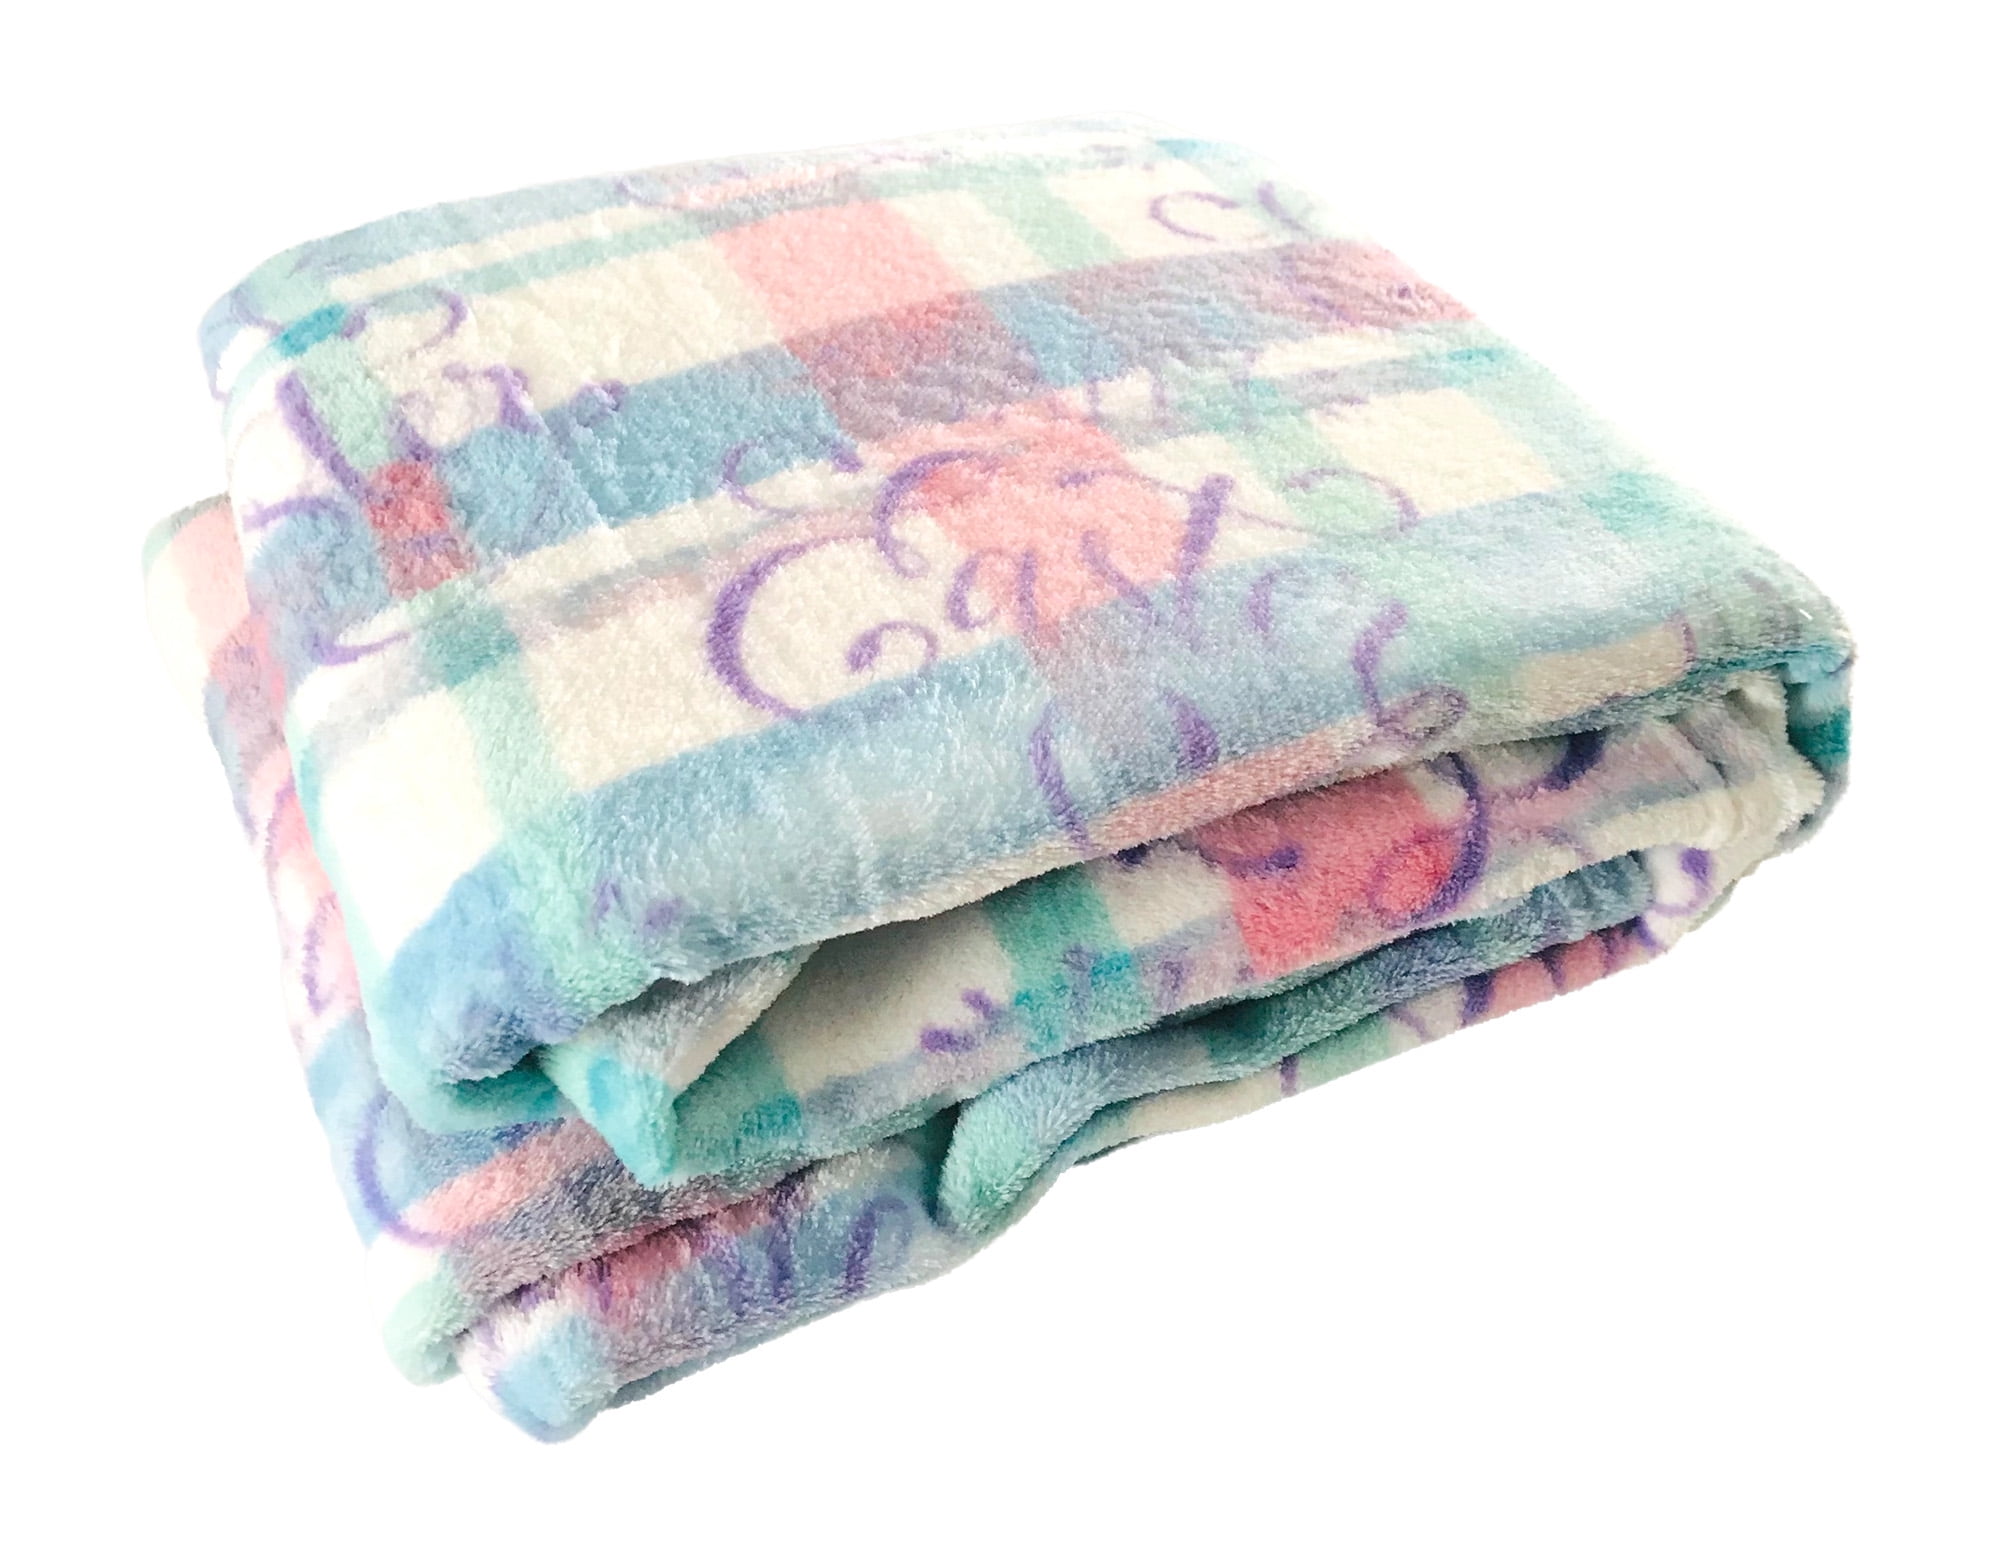 Meet 1998 Flannel Throw Blanket Easter Day Spring Flowers Bunny Tail Lightweight Fleece Bed Blanket Colorful Eggs Soft Warm Blanket All Season Sofa/Couch/Chair for Child Adults 50 x 80 inch